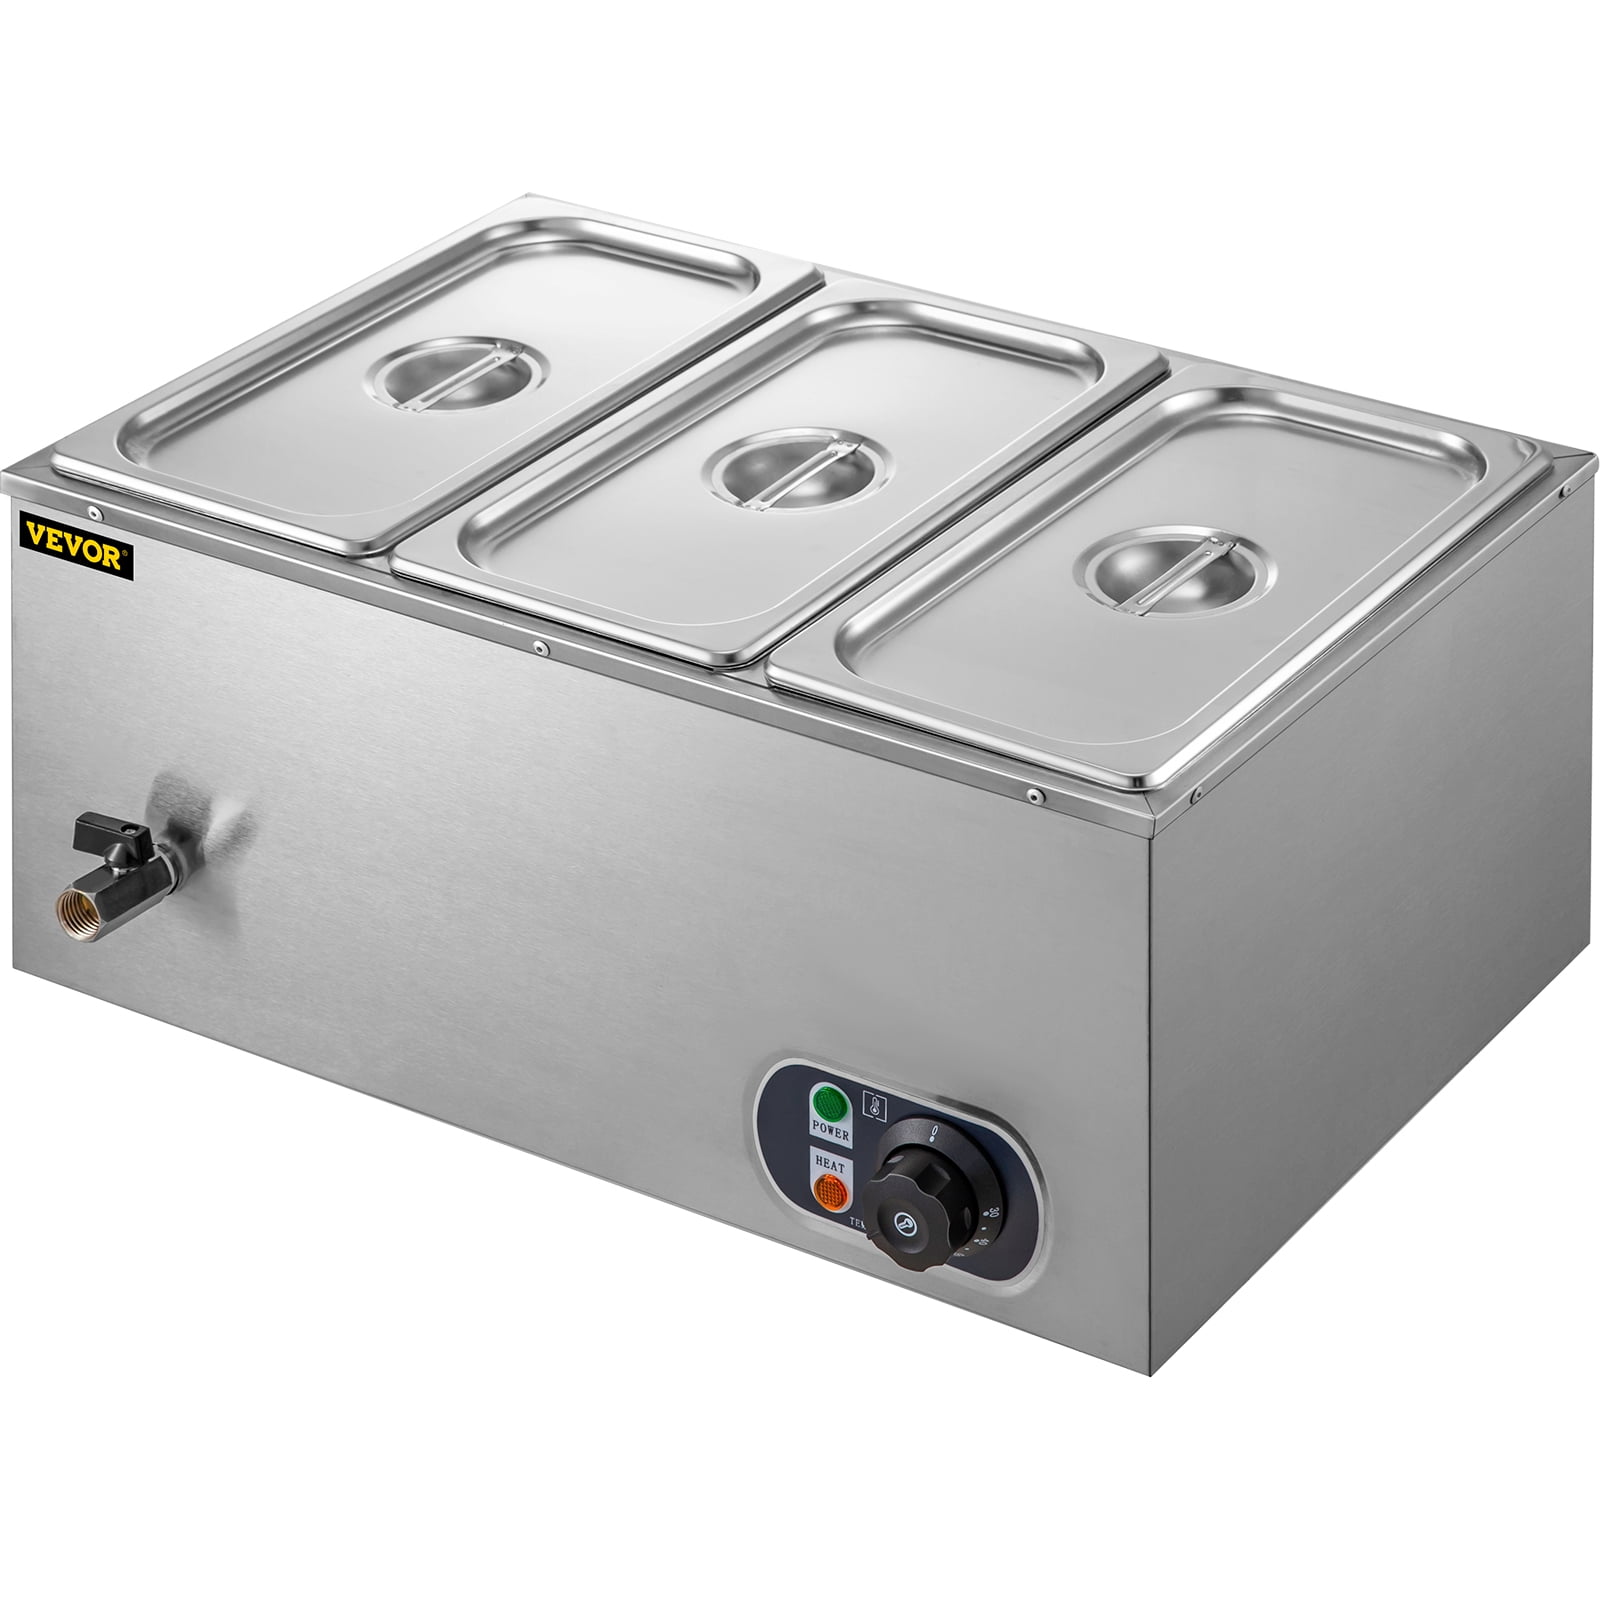 110V 4-Pan Commercial Food Warmer, 1200W Electric Steam Table 15cm